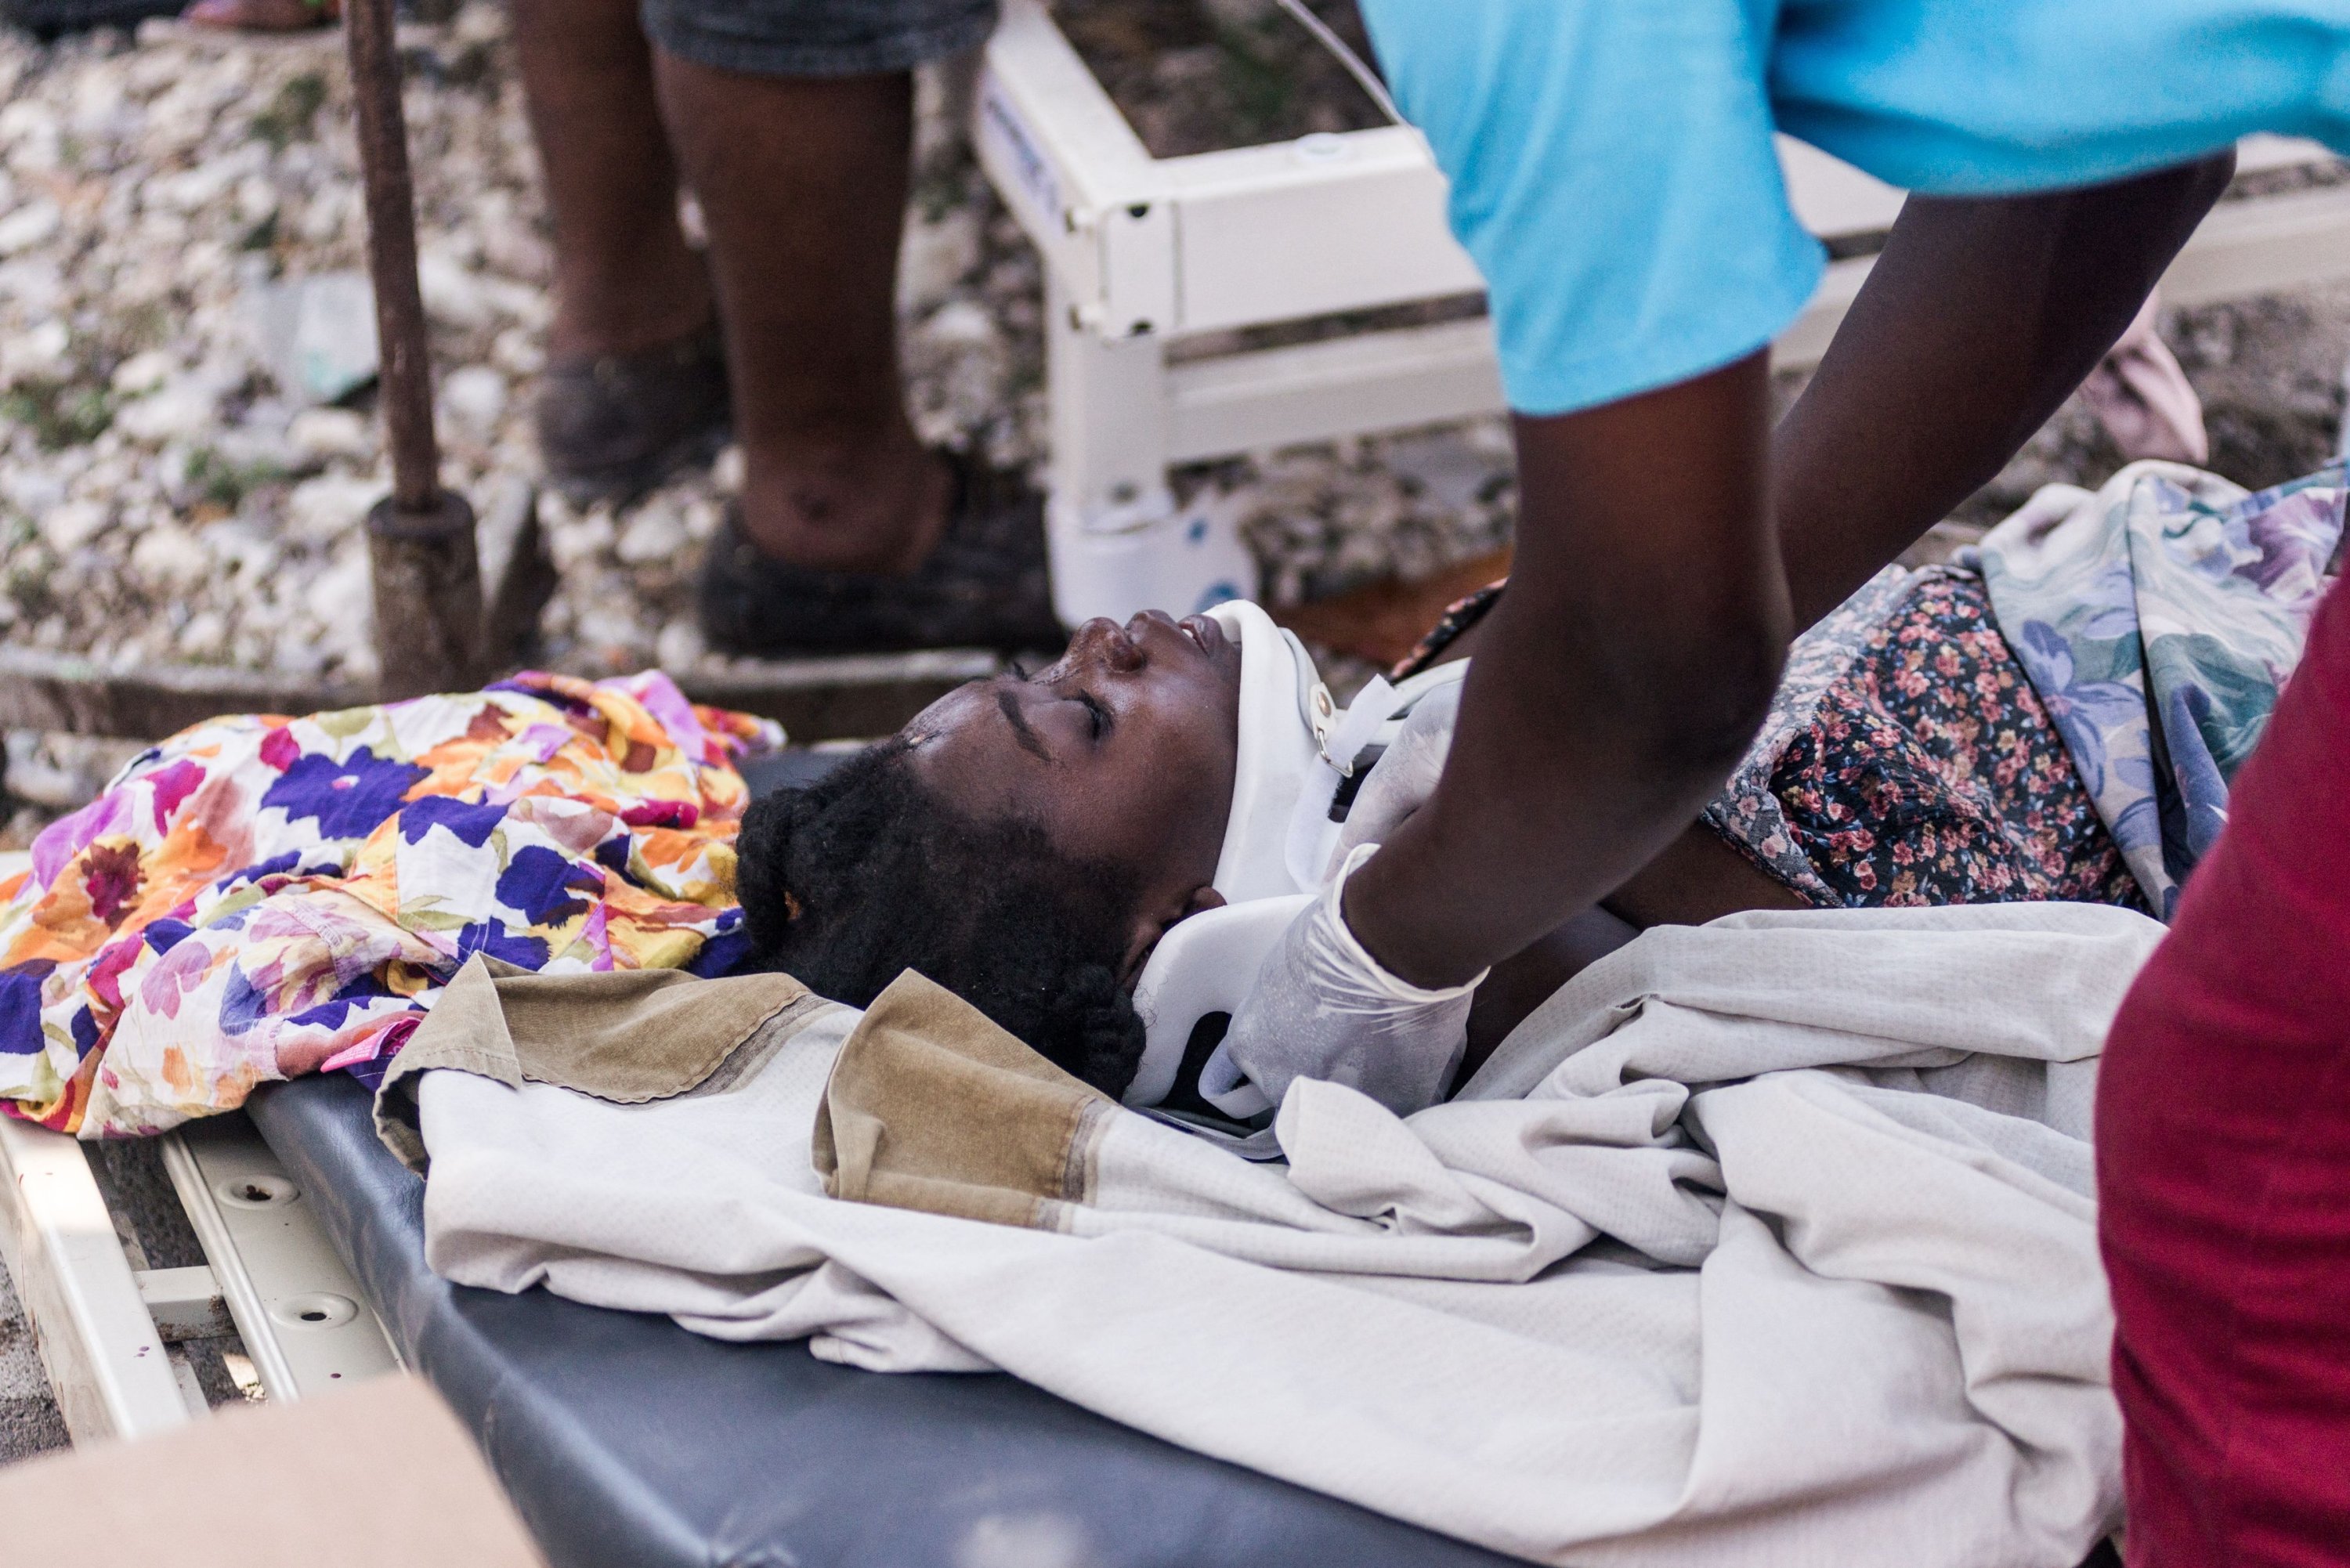 An injured woman has her neck braced by a doctor at a hospital in Les Cayes on Aug. 15, 2021, after a 7.2-magnitude earthquake struck the southwest peninsula of Haiti. (AFP Photo)